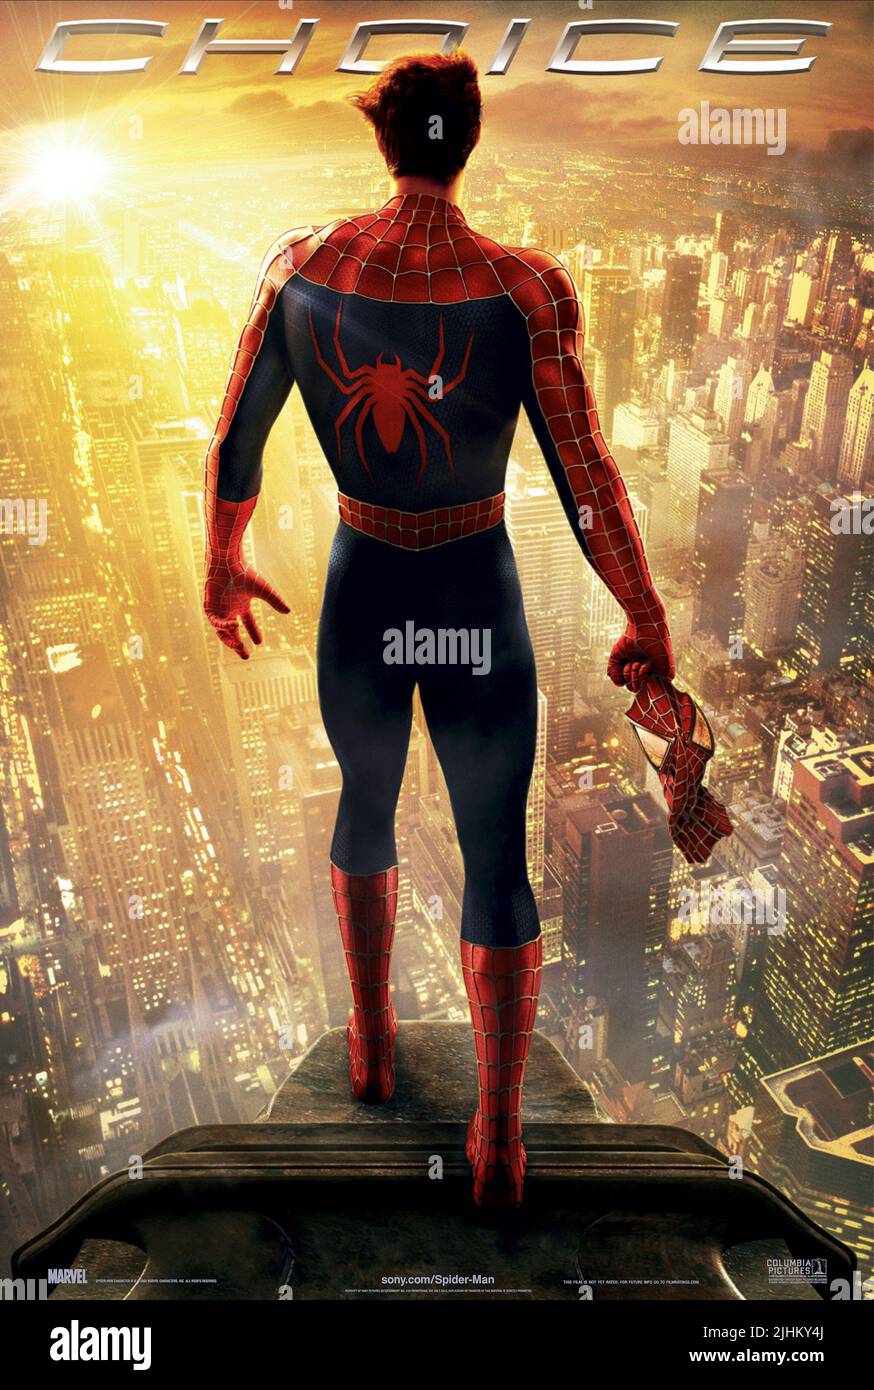 TOBEY MAGUIRE POSTER, SPIDER-MAN 2, 2004 Stock Photo